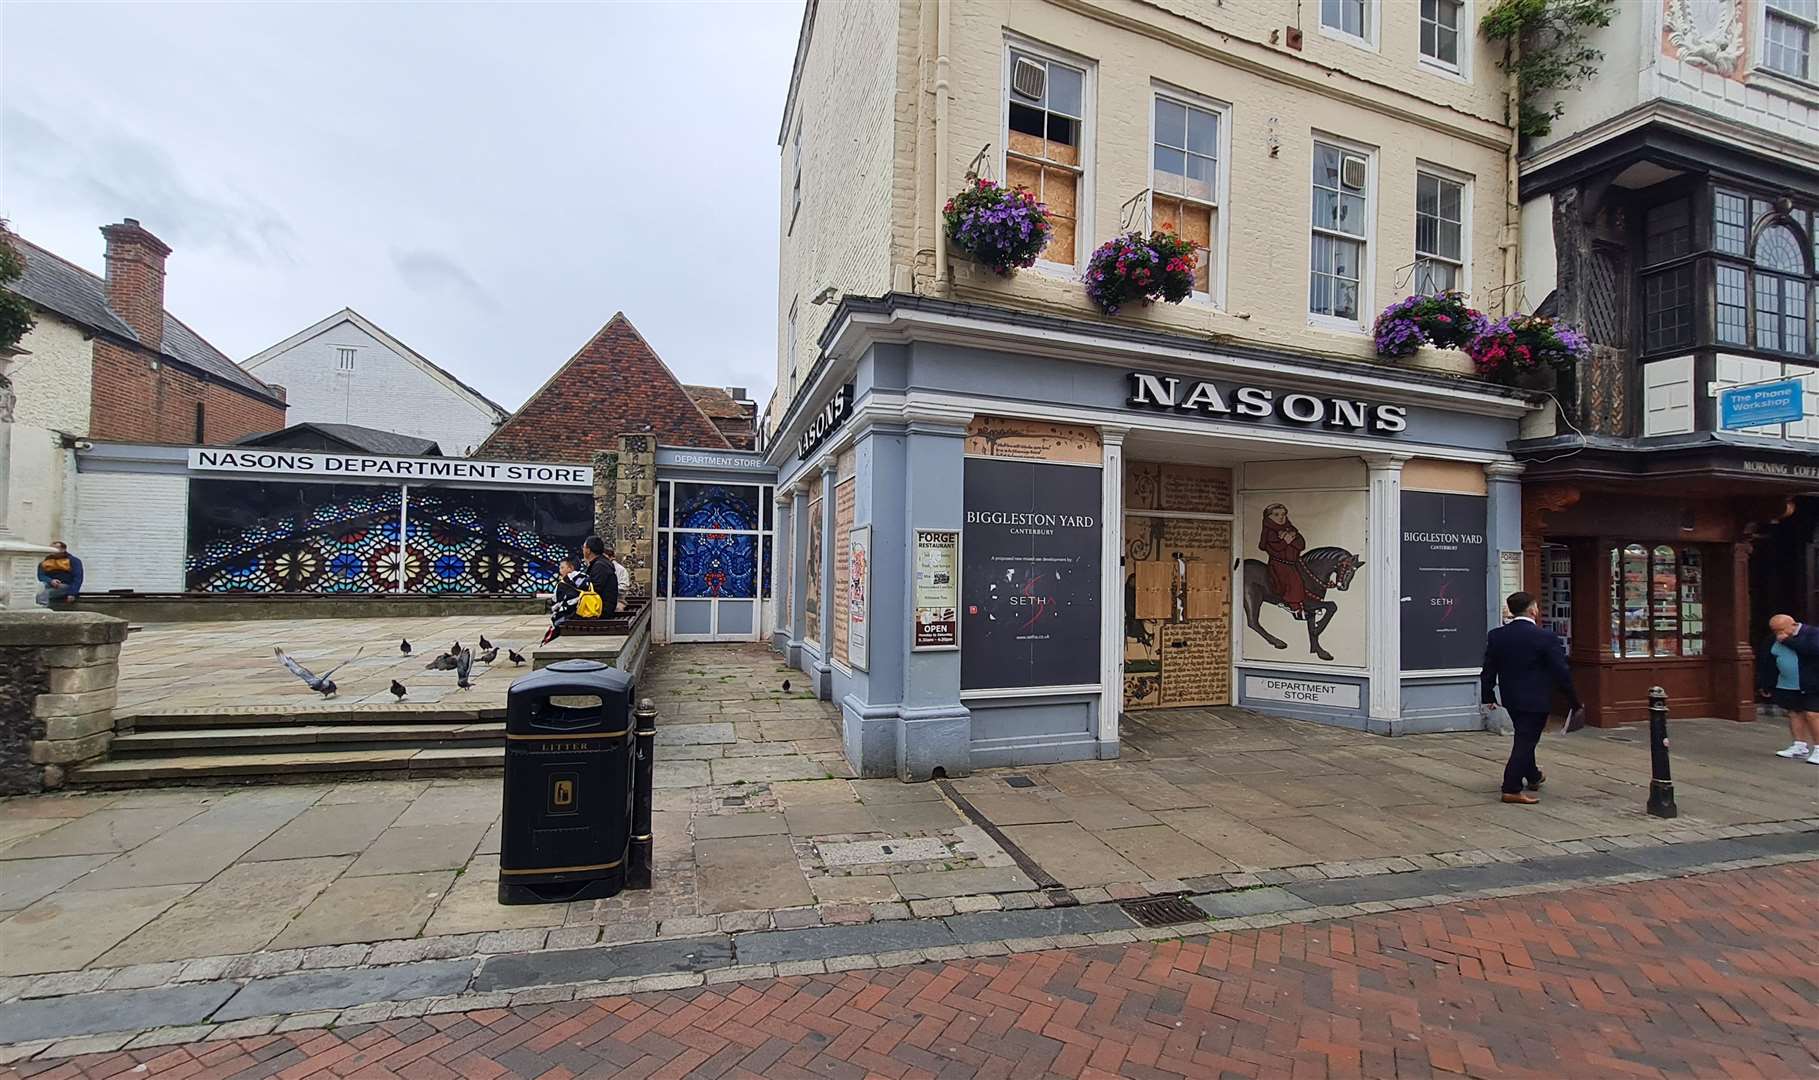 The former Nasons store in Canterbury has stood empty and abandoned for almost five years